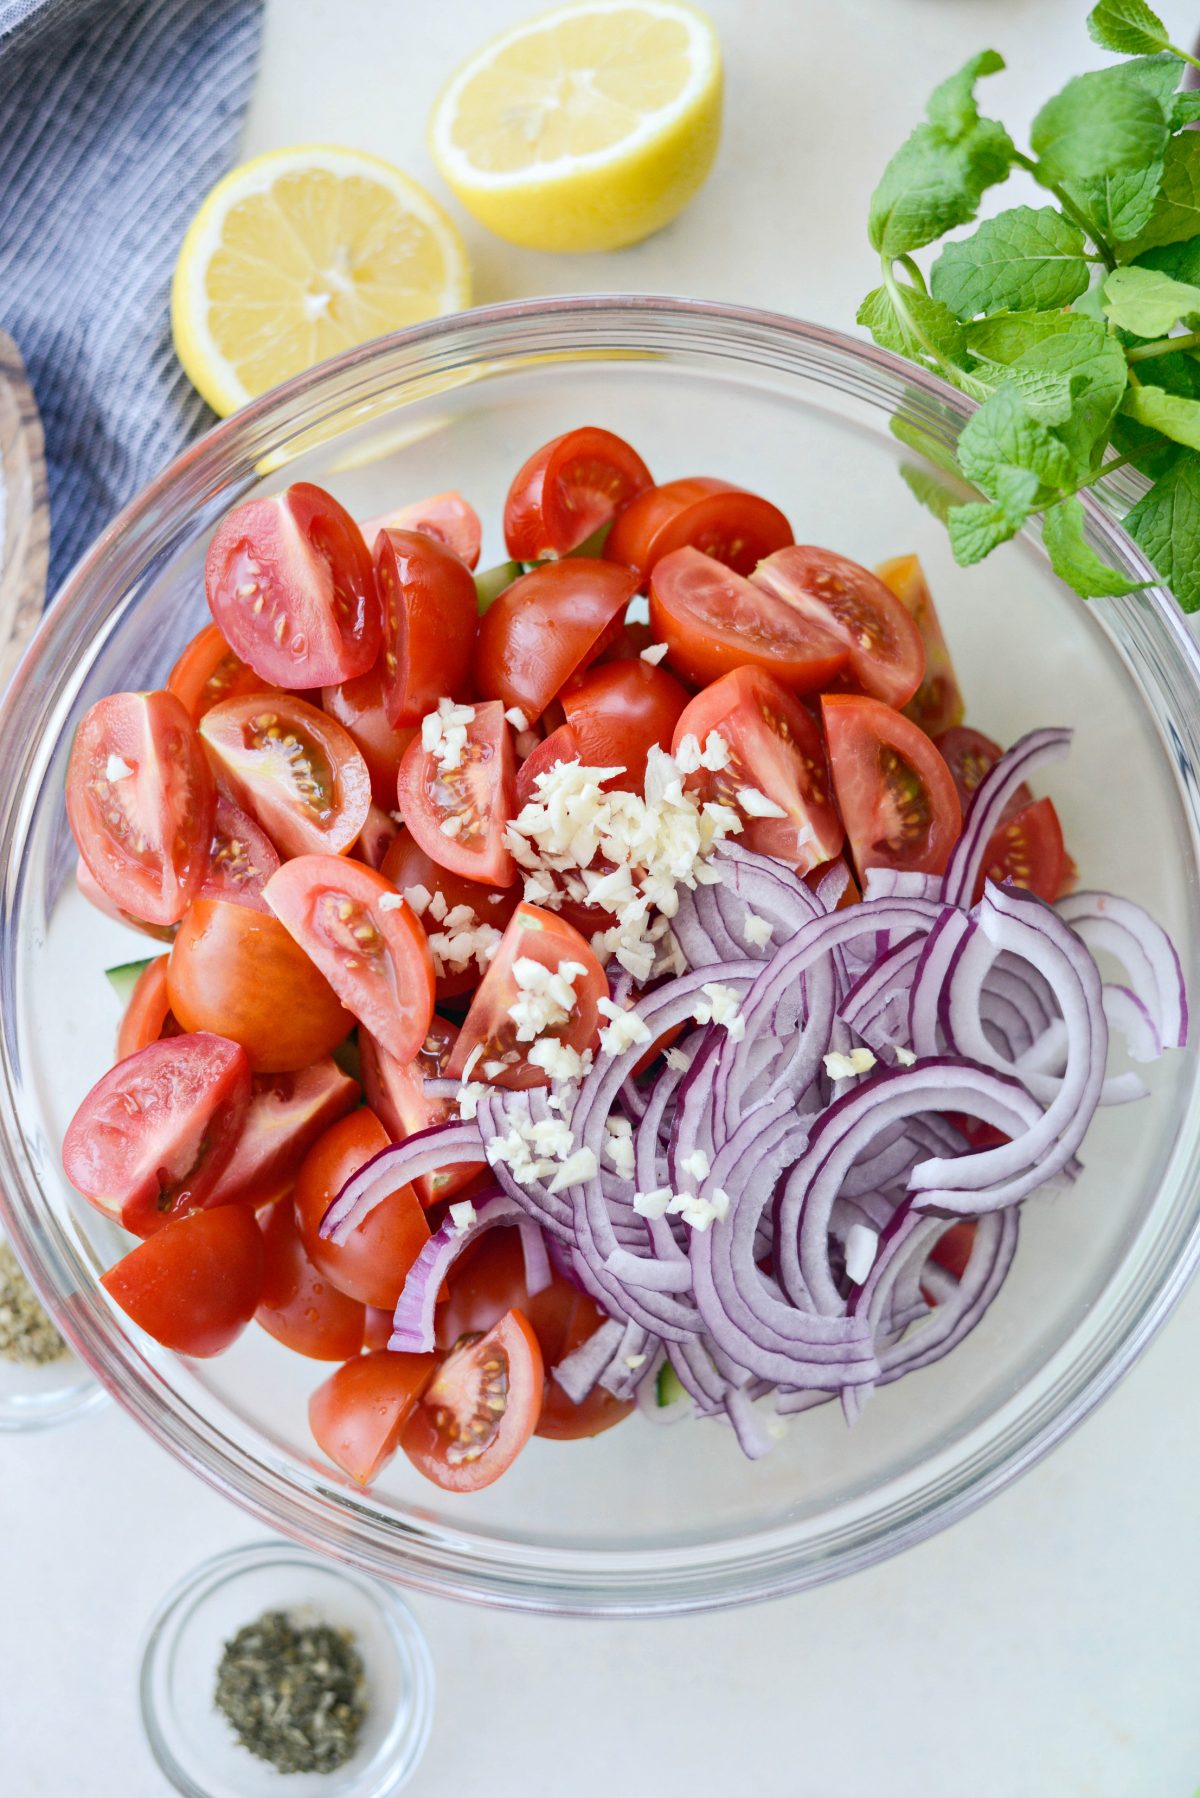 add quartered tomatoes, sliced red onion and minced garlic to the same bowl.